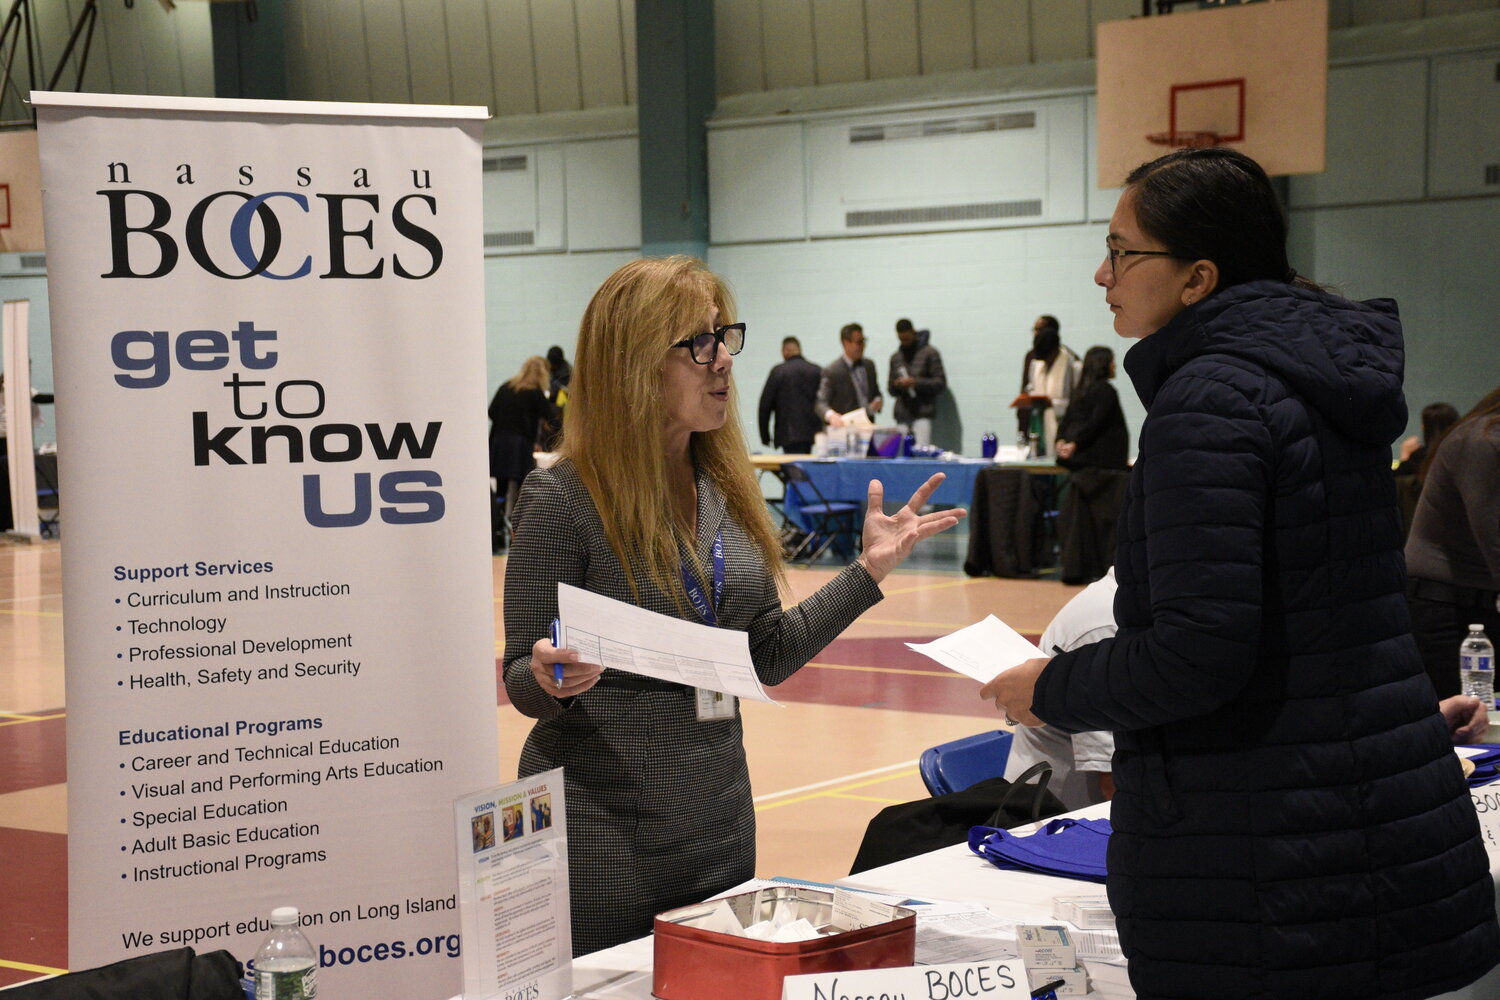 Job seekers get details about career opportunities at last year’s job fair.